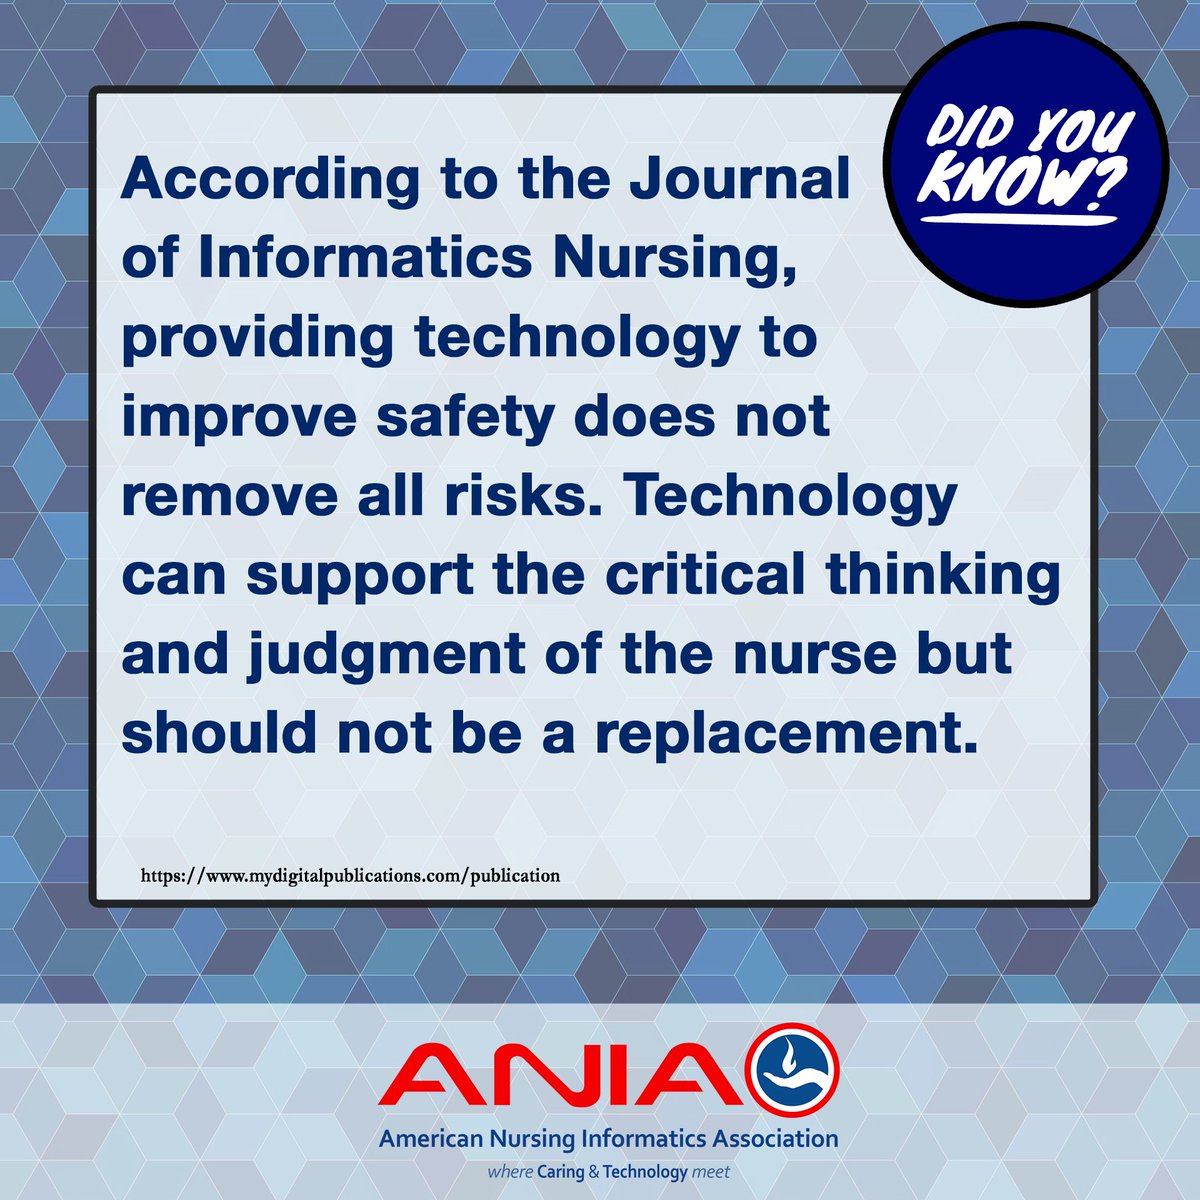 DID YOU KNOW? | According to the Journal of Informatics Nursing, providing technology to improve safety does not remove all risks. Technology can support the critical thinking and judgment of the nurse but should not be a replacement. 

#factfriday #healthtech #nursinginformatics